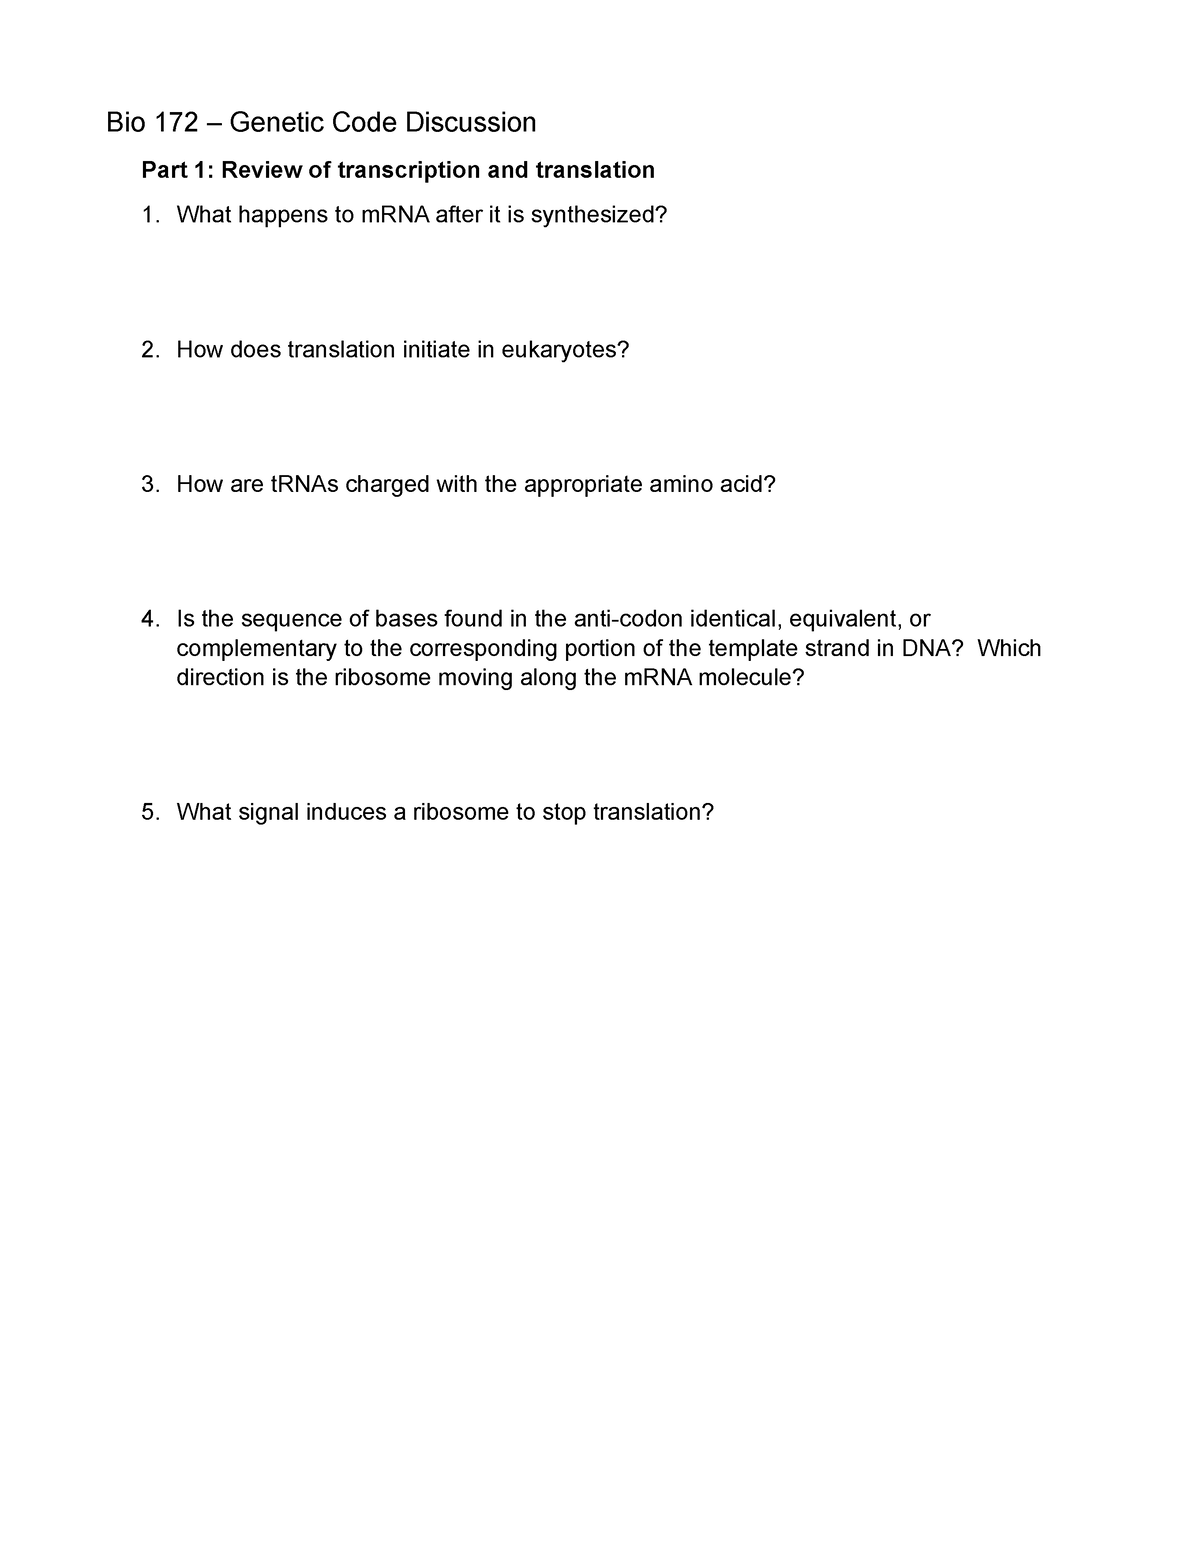 essay questions on genetic code